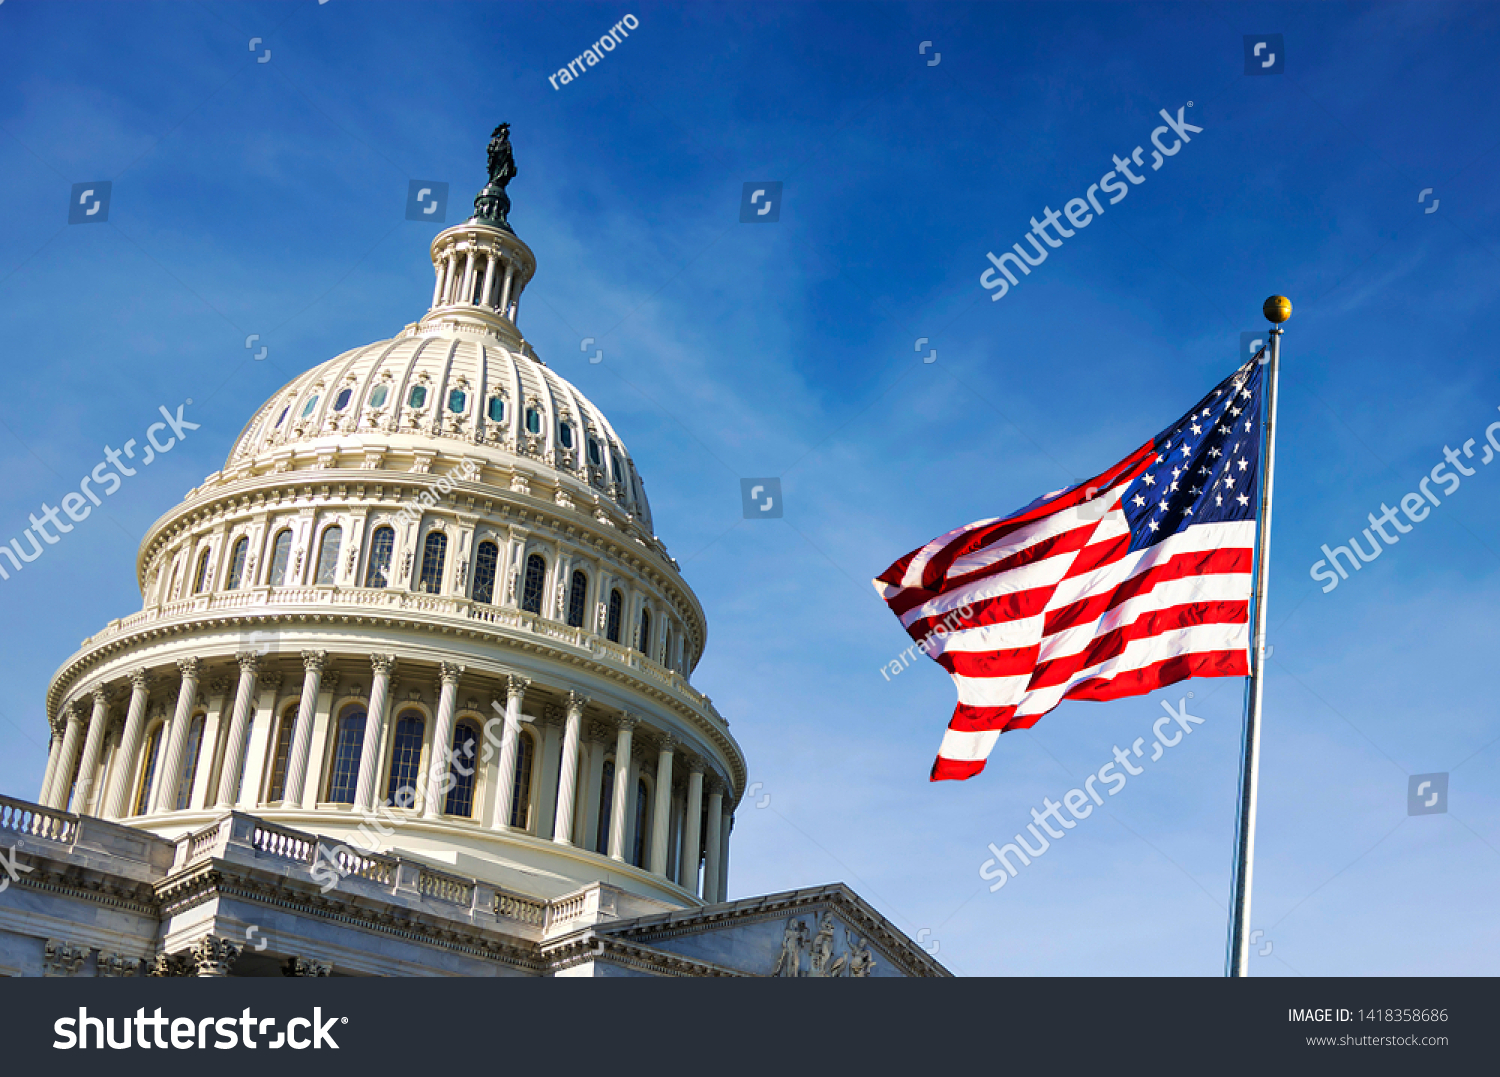 American flag waving with the Capitol Hill in the background #1418358686